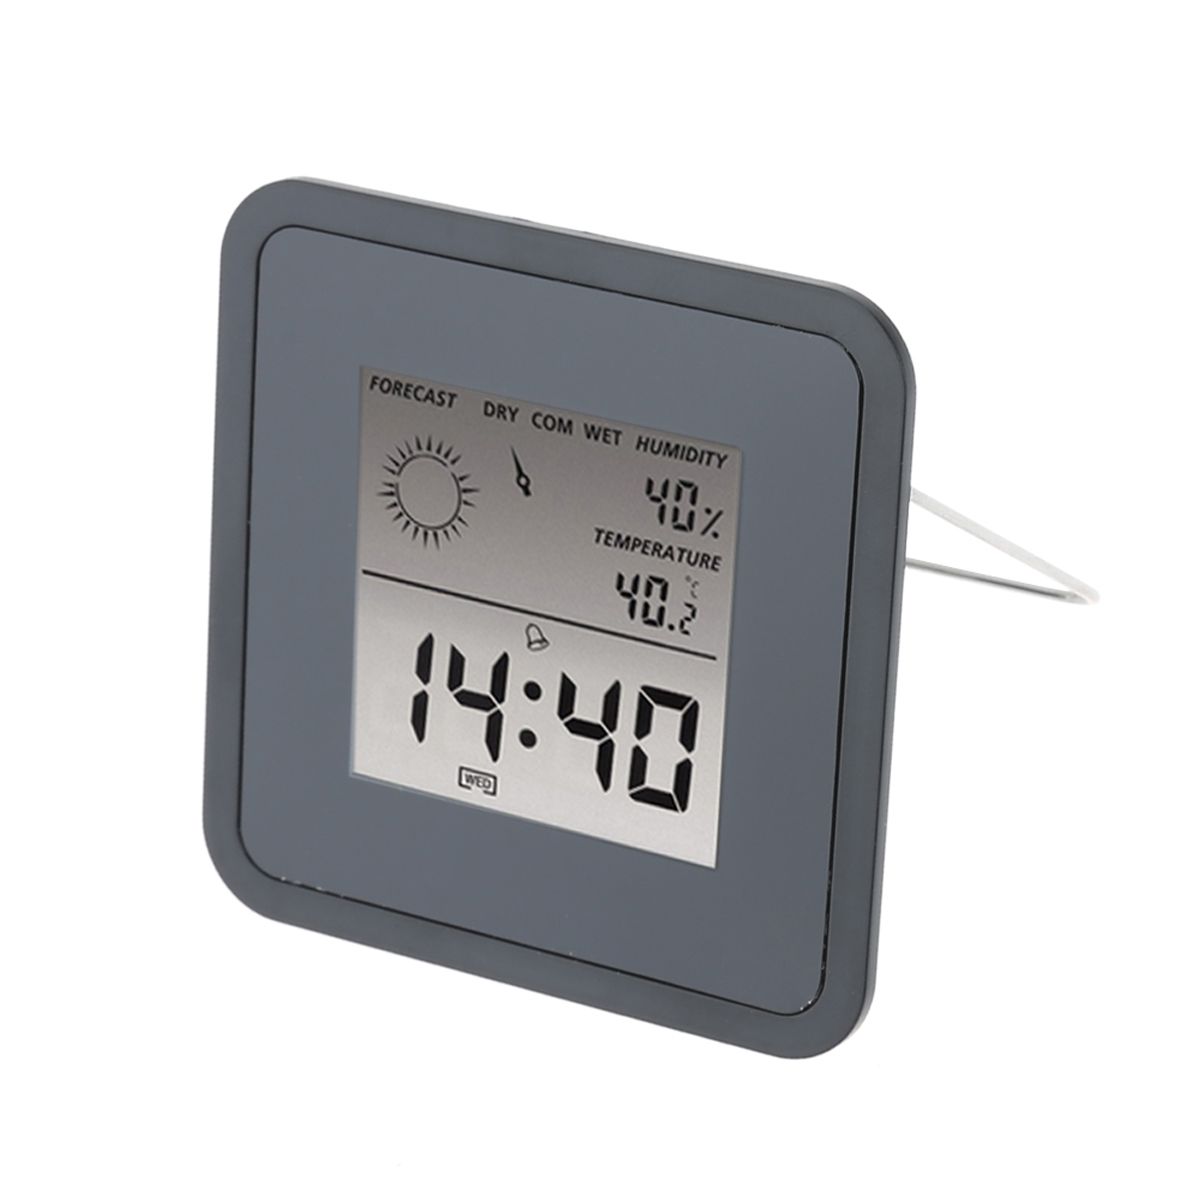 TS-S66-Digital-Thermometer-Hygrometer-0--60-Electronic-Thermometer-With-Calendar-And-Alarm-Clock-Fun-1441494